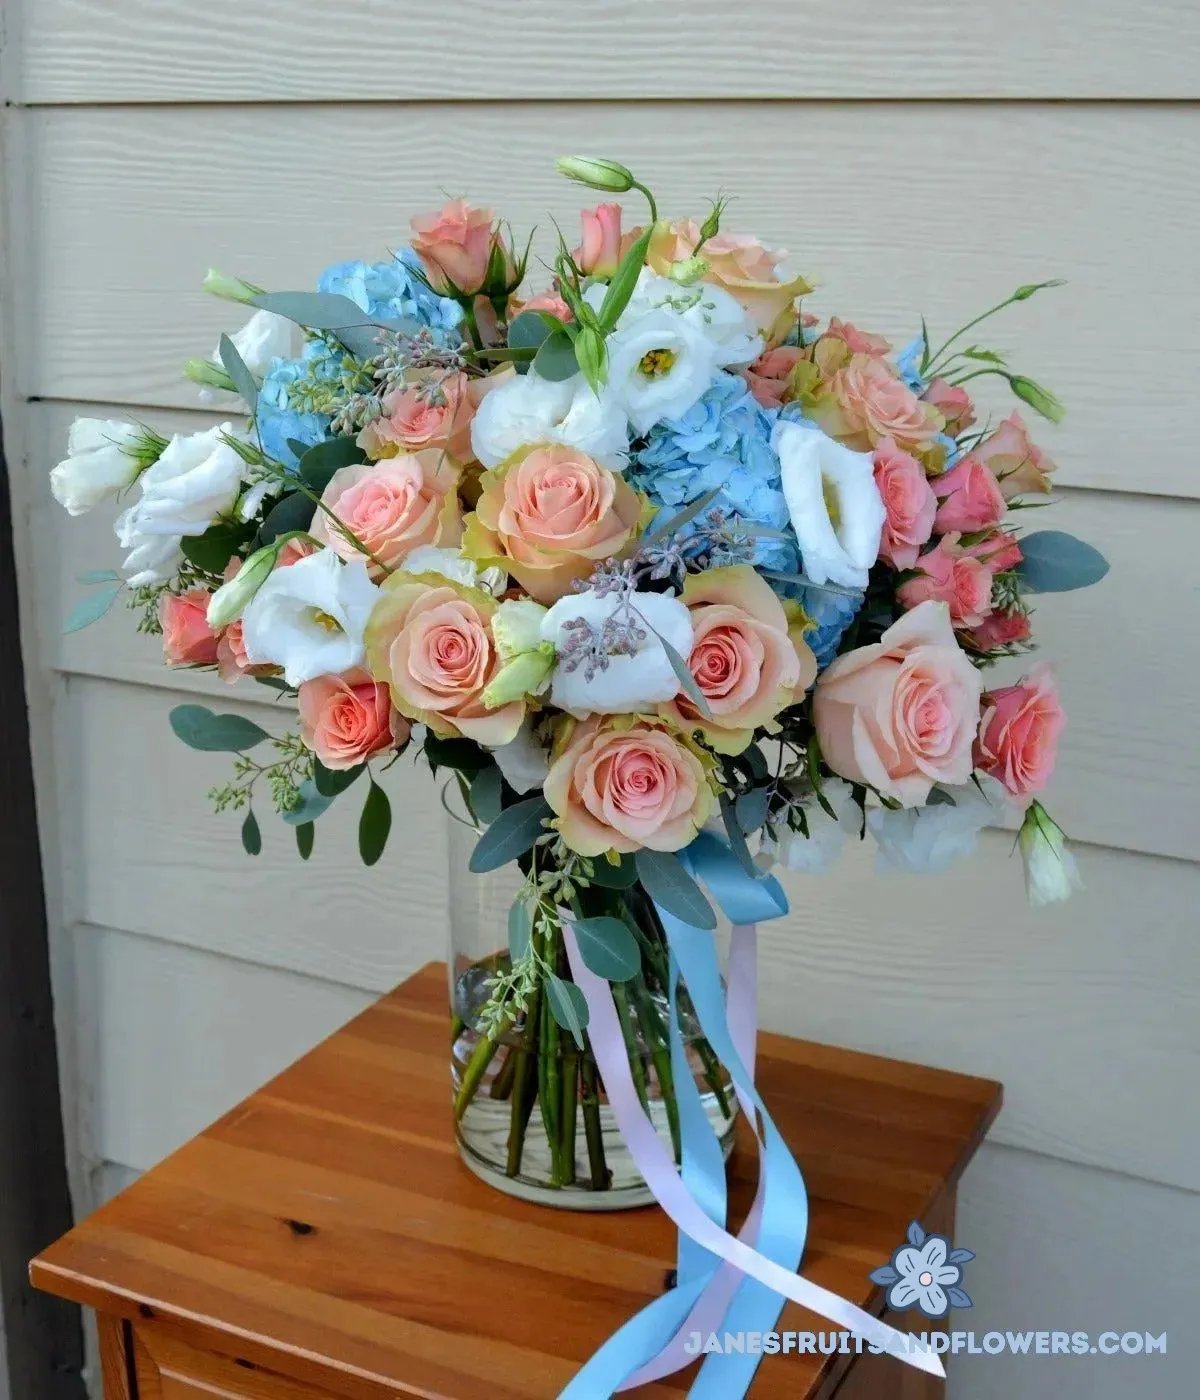 Beautiful Love Story Bouquet - Jane's Fruits And Flowers